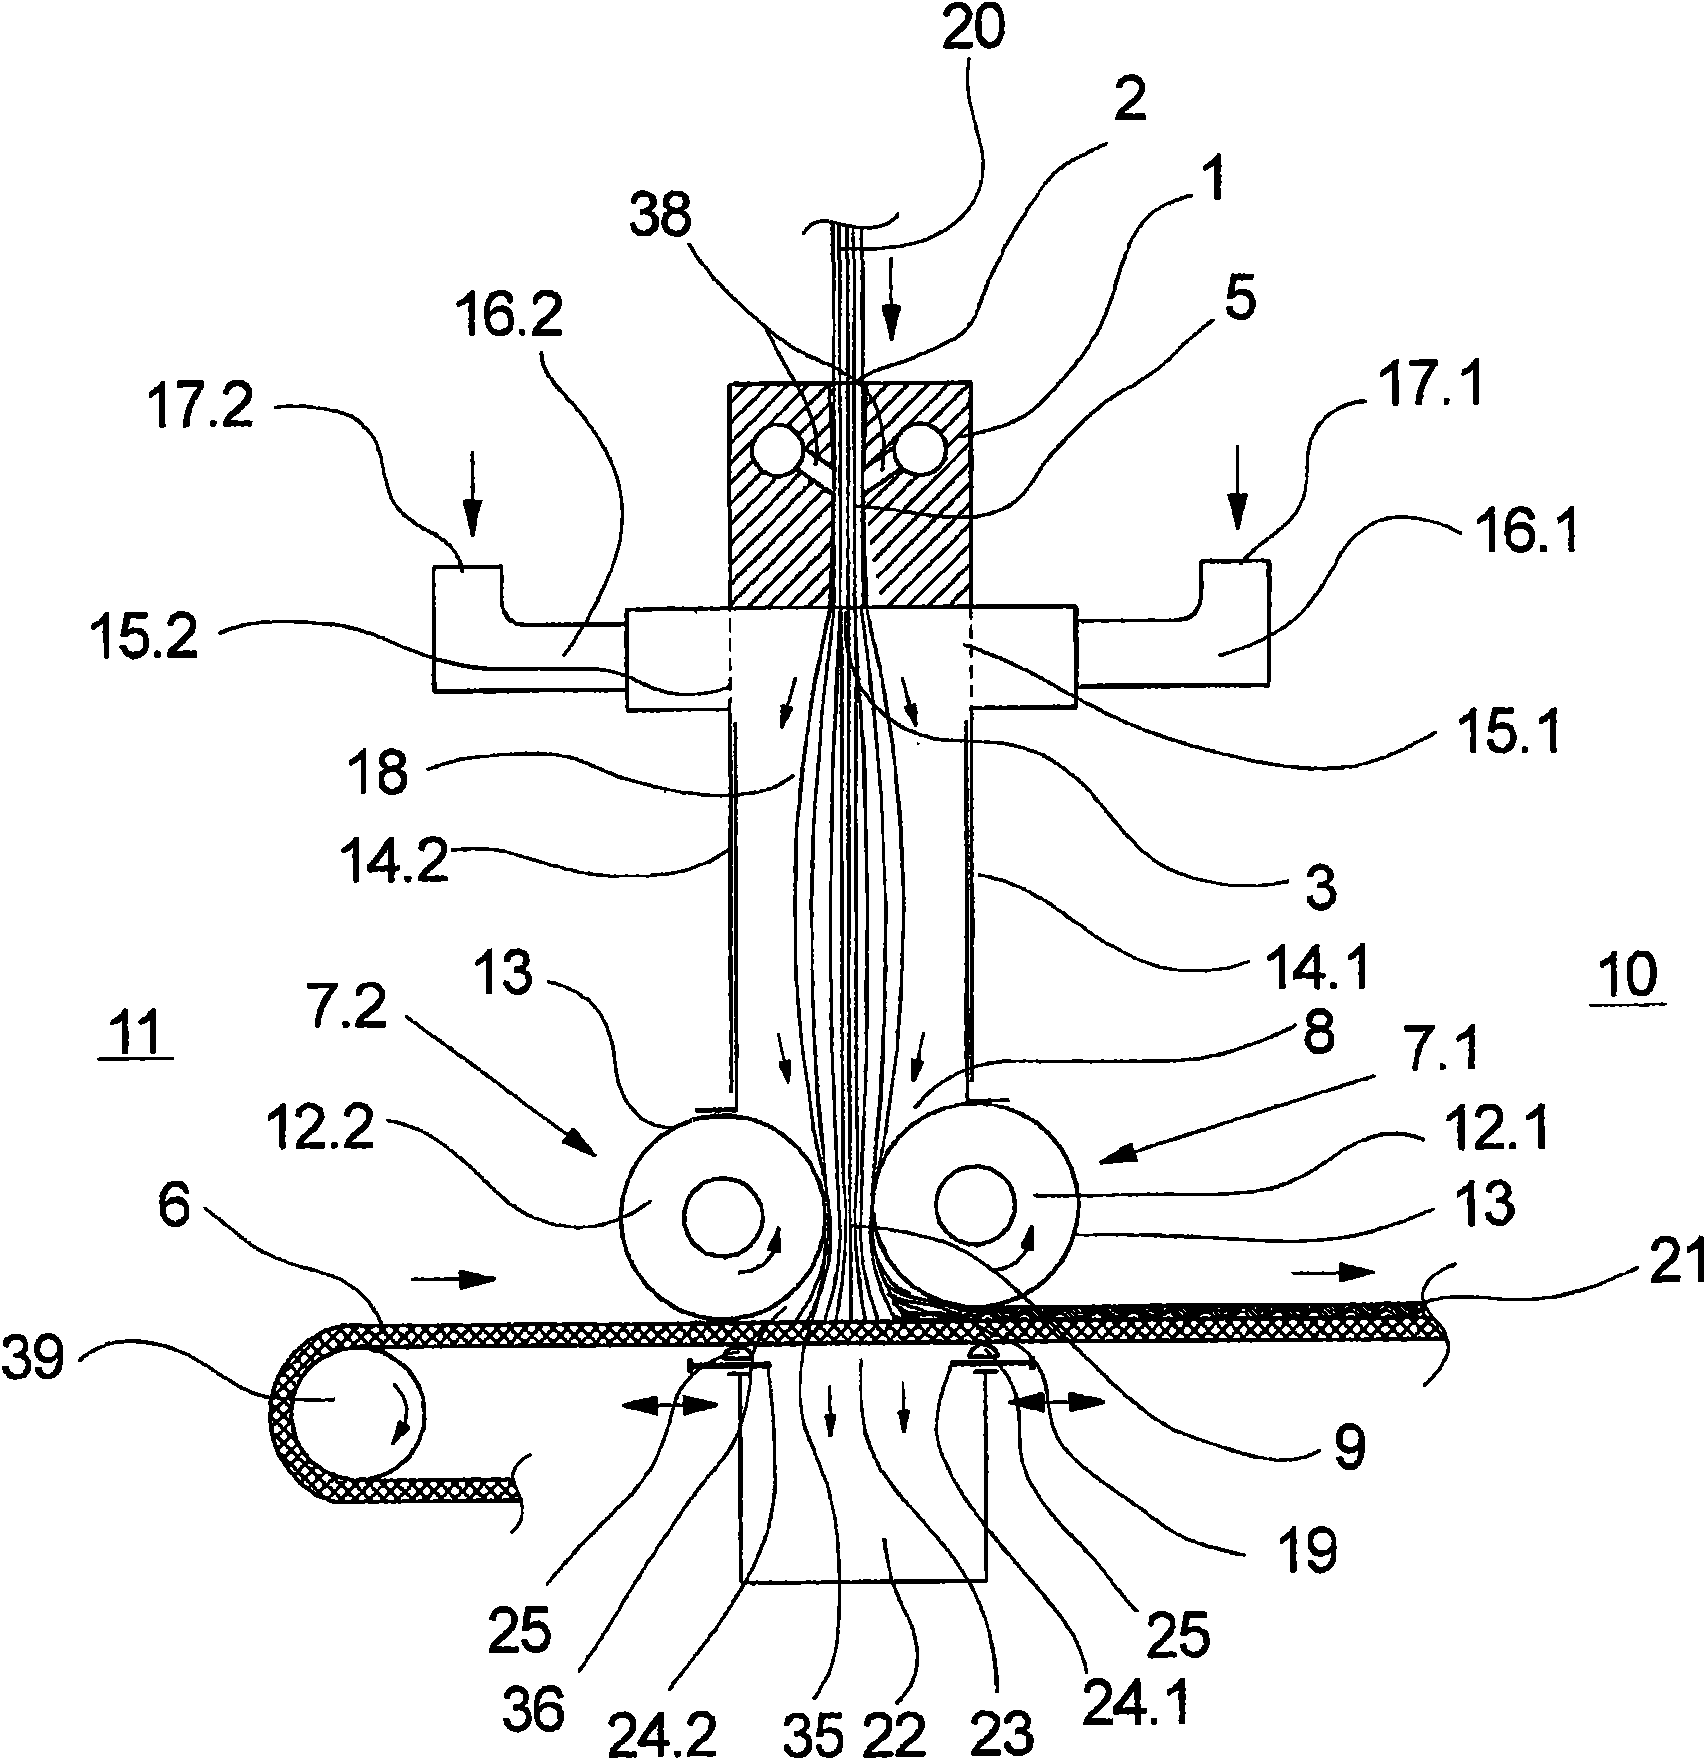 Apparatus and method for depositing synthetic fibers to form a non-woven web